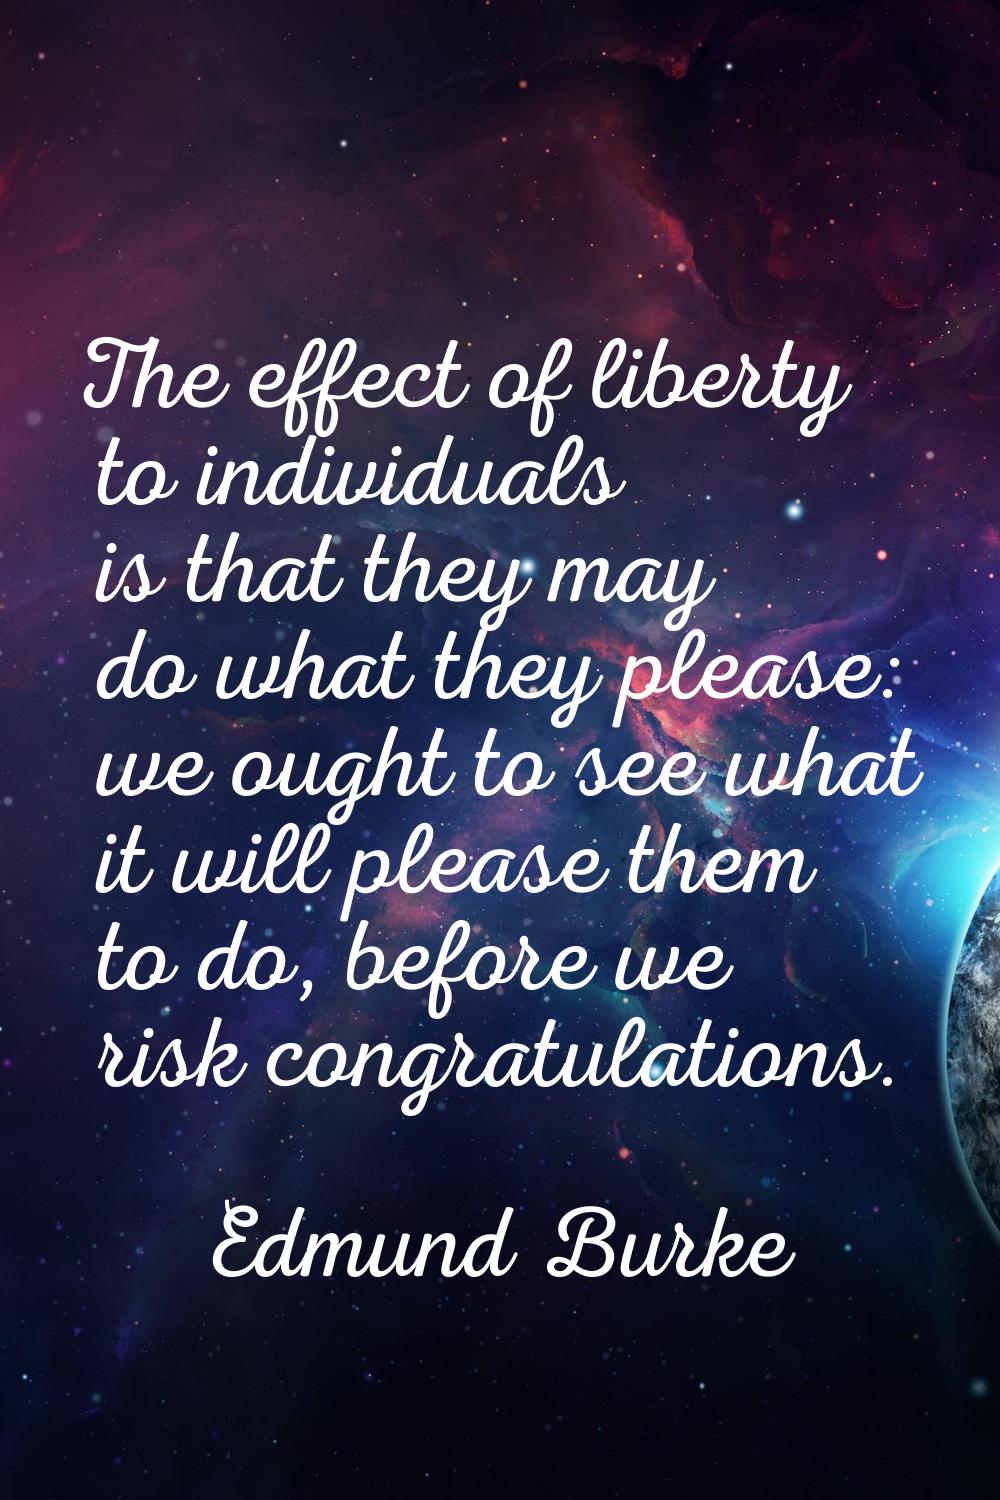 The effect of liberty to individuals is that they may do what they please: we ought to see what it 